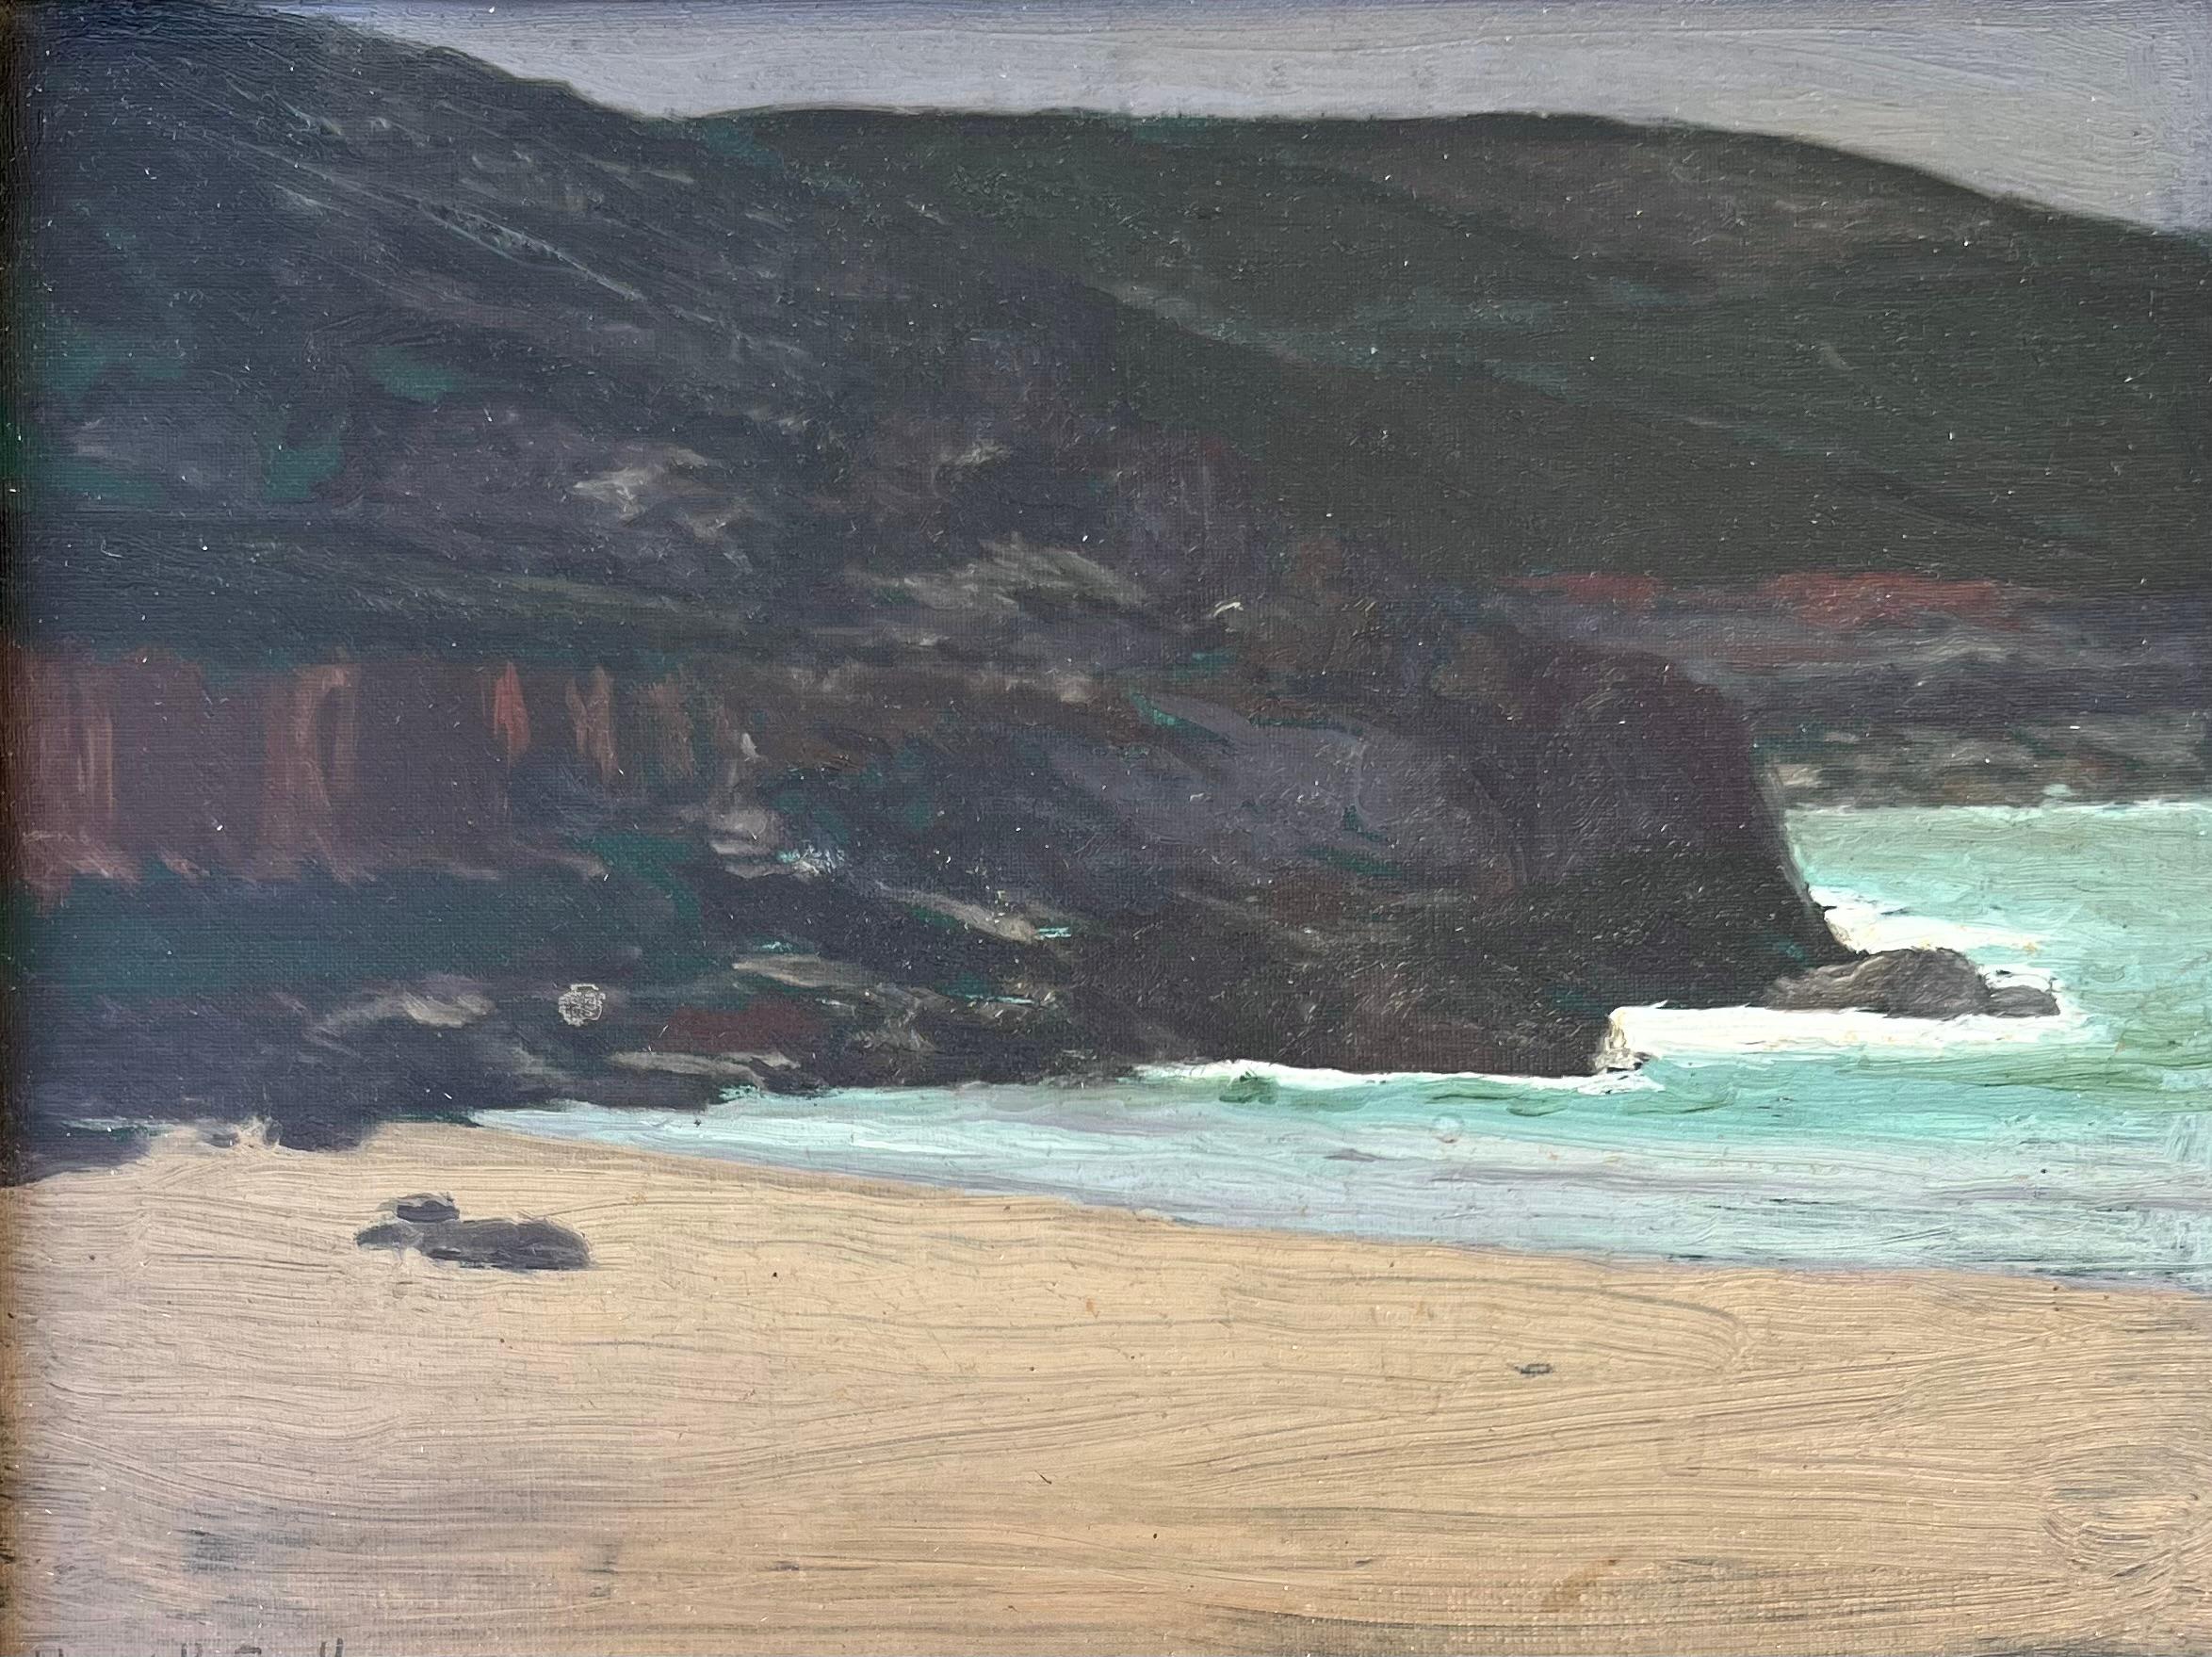 St Ives Beach - Post-Impressionist Painting by Henry Bayley Snell